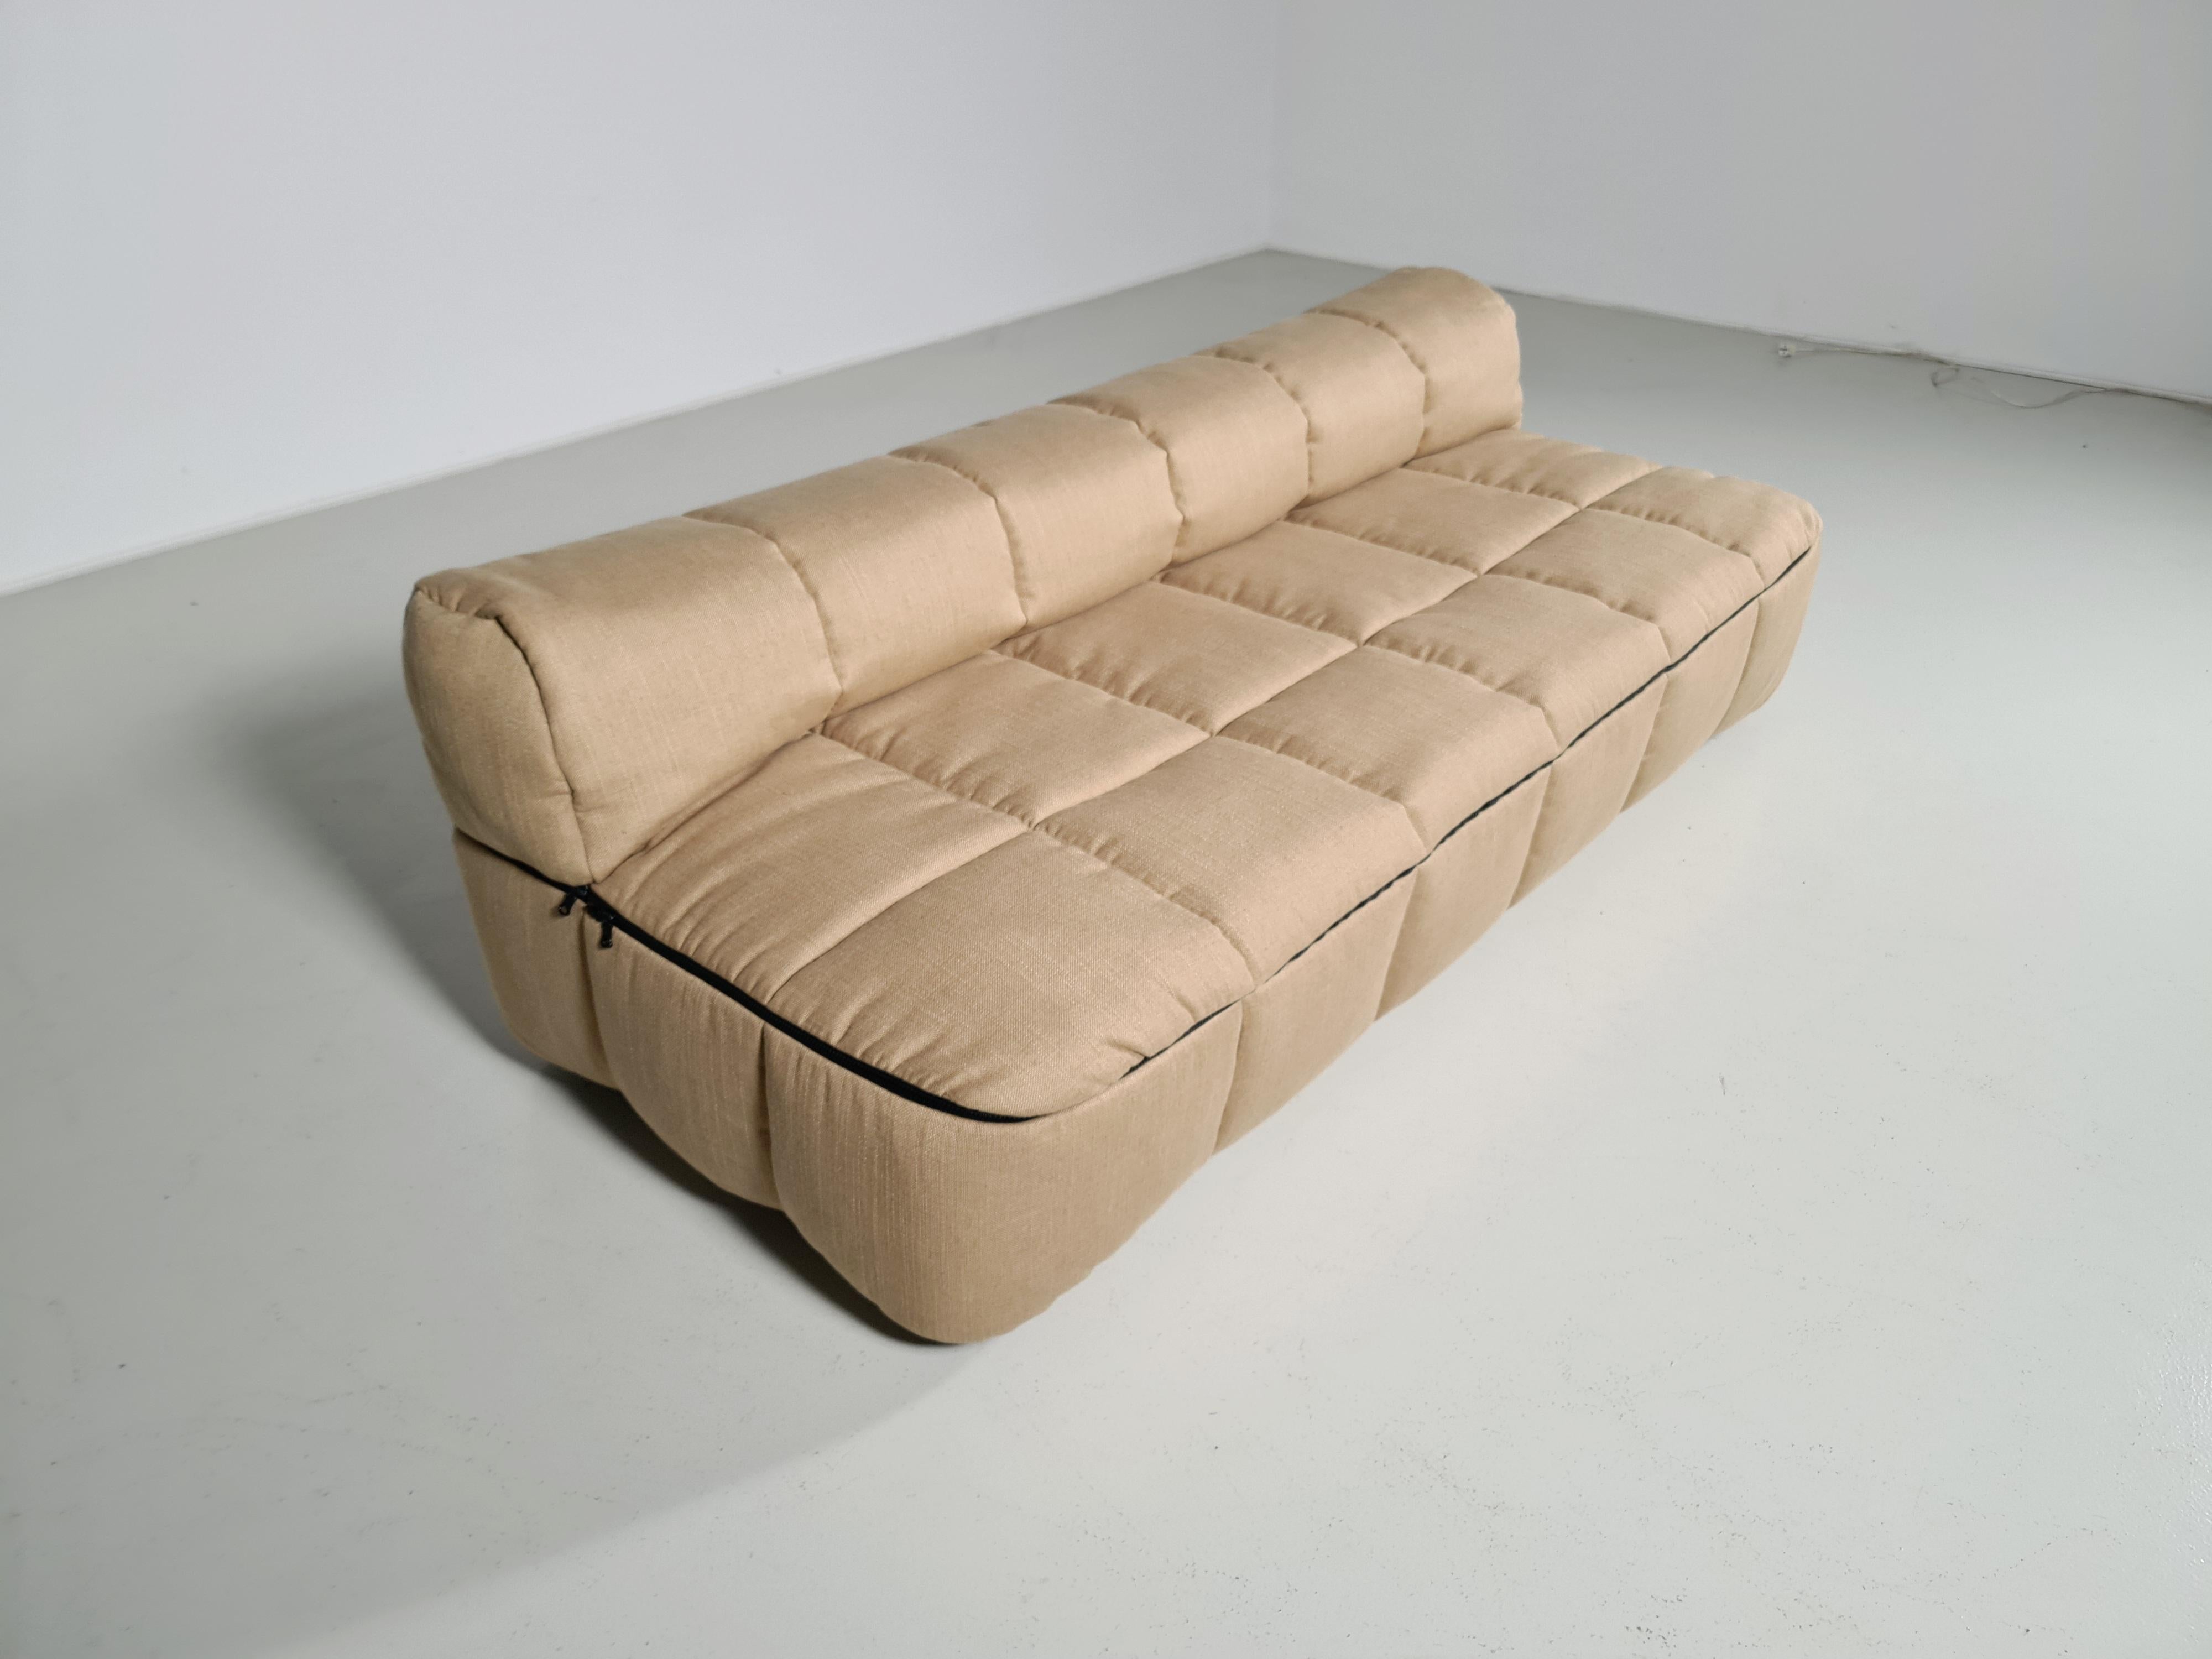 1970s sofa bed